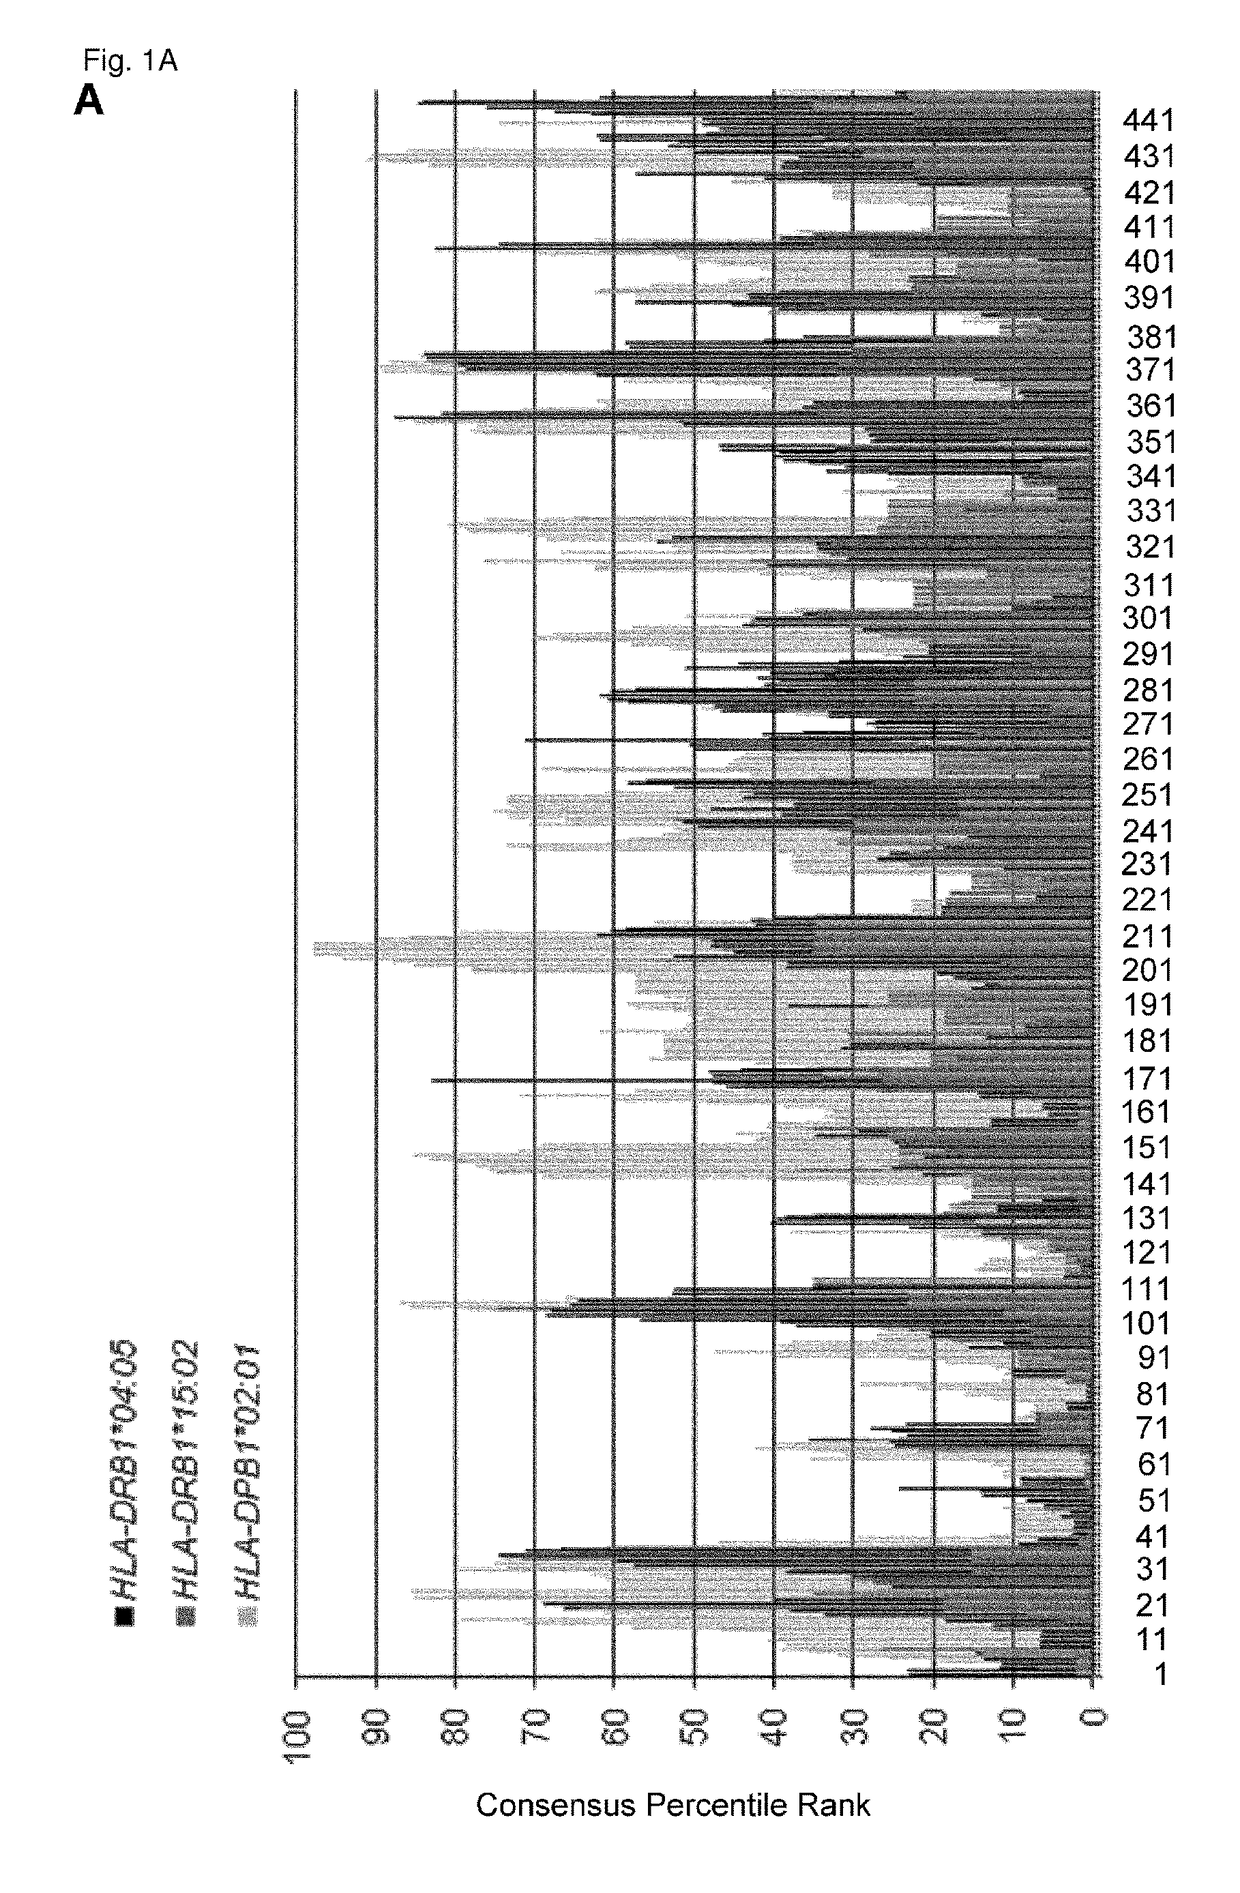 CDCA1 epitope peptides for Th1 cells and vaccines containing the same